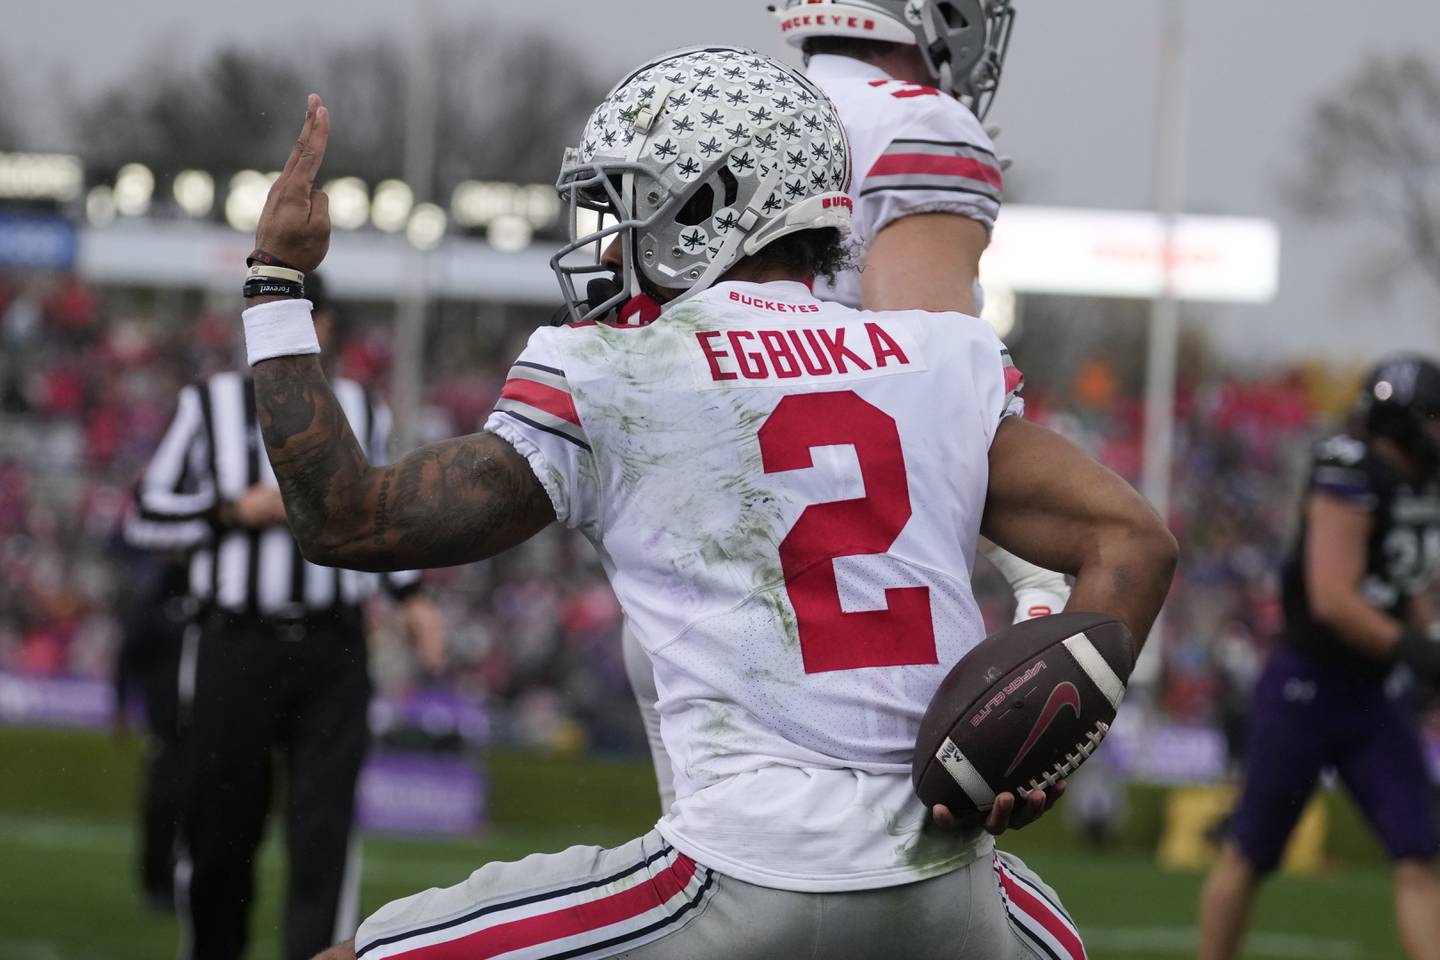 Ohio State wide receiver Emeka Egbuka celebrates after scoring a touchdown against Northwestern during the first half Saturday in Evanston. 